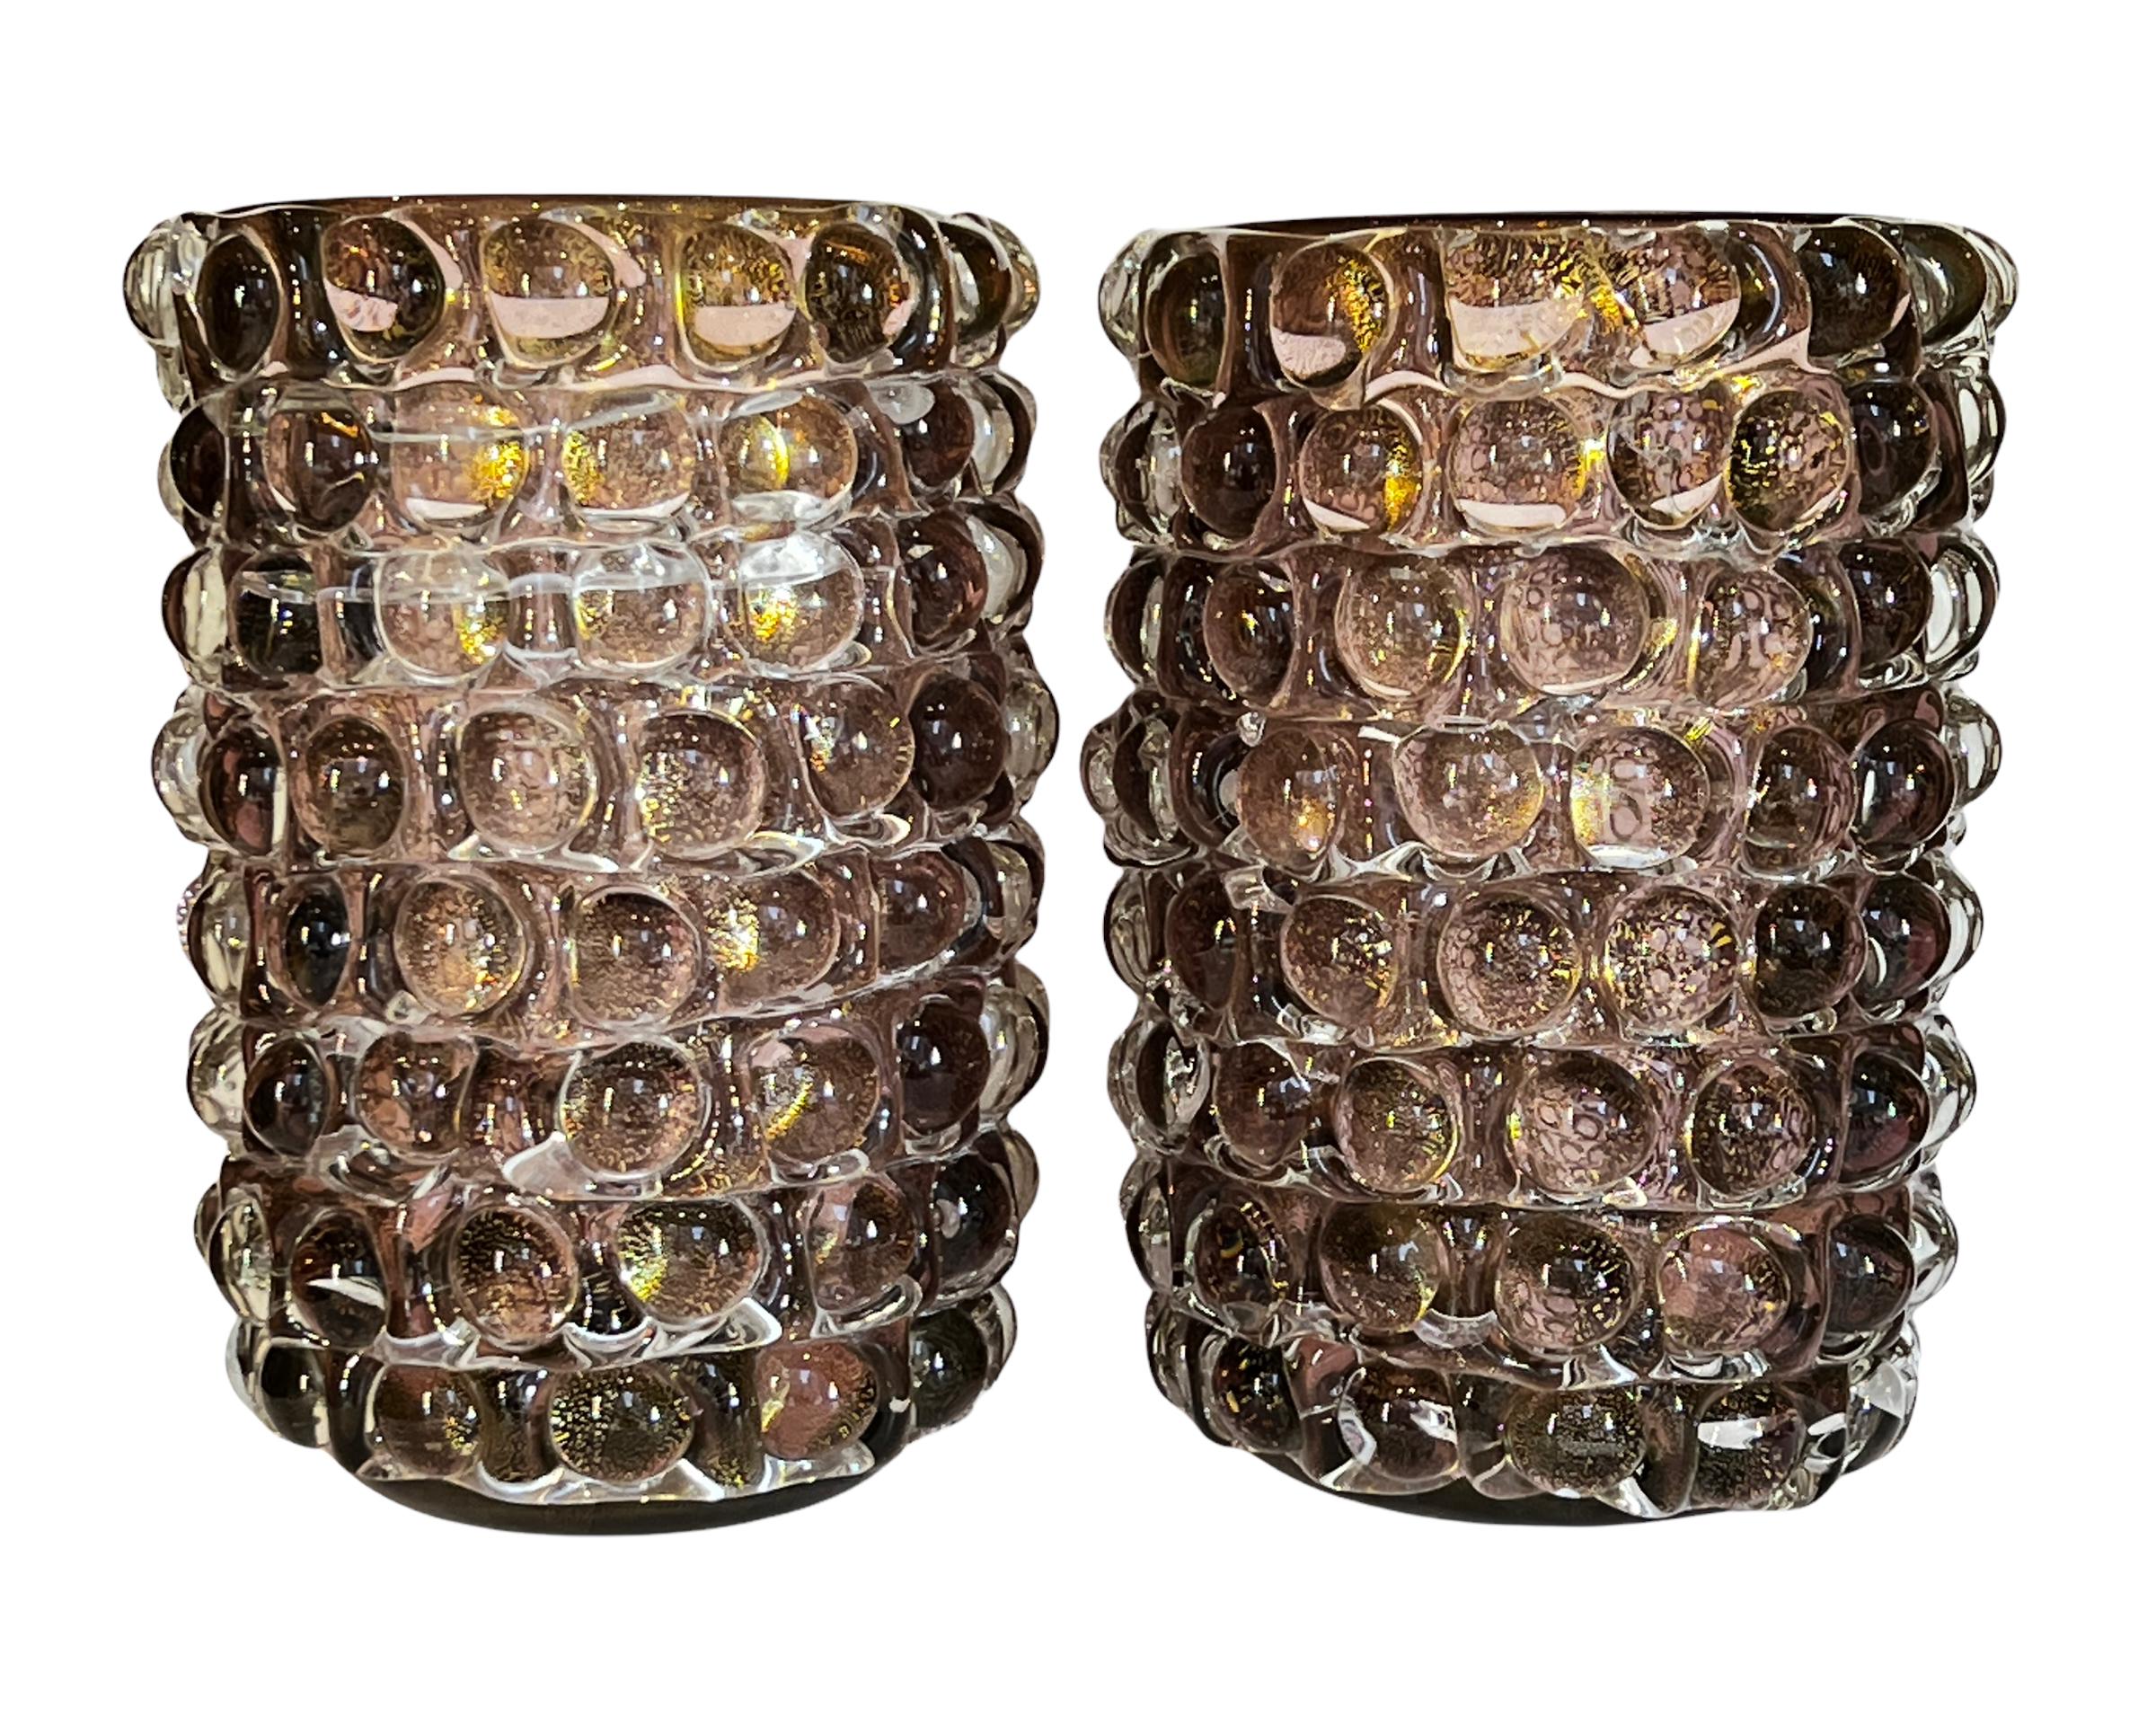 Our beautiful rare pair of Lenti glass vases from Murano, after the innovative series by Ercole Barovier for Barovier, Toso & Co, 1940, are crafted from iridized pale violet glass with spherical applications, or lenti (lenses) as they were described